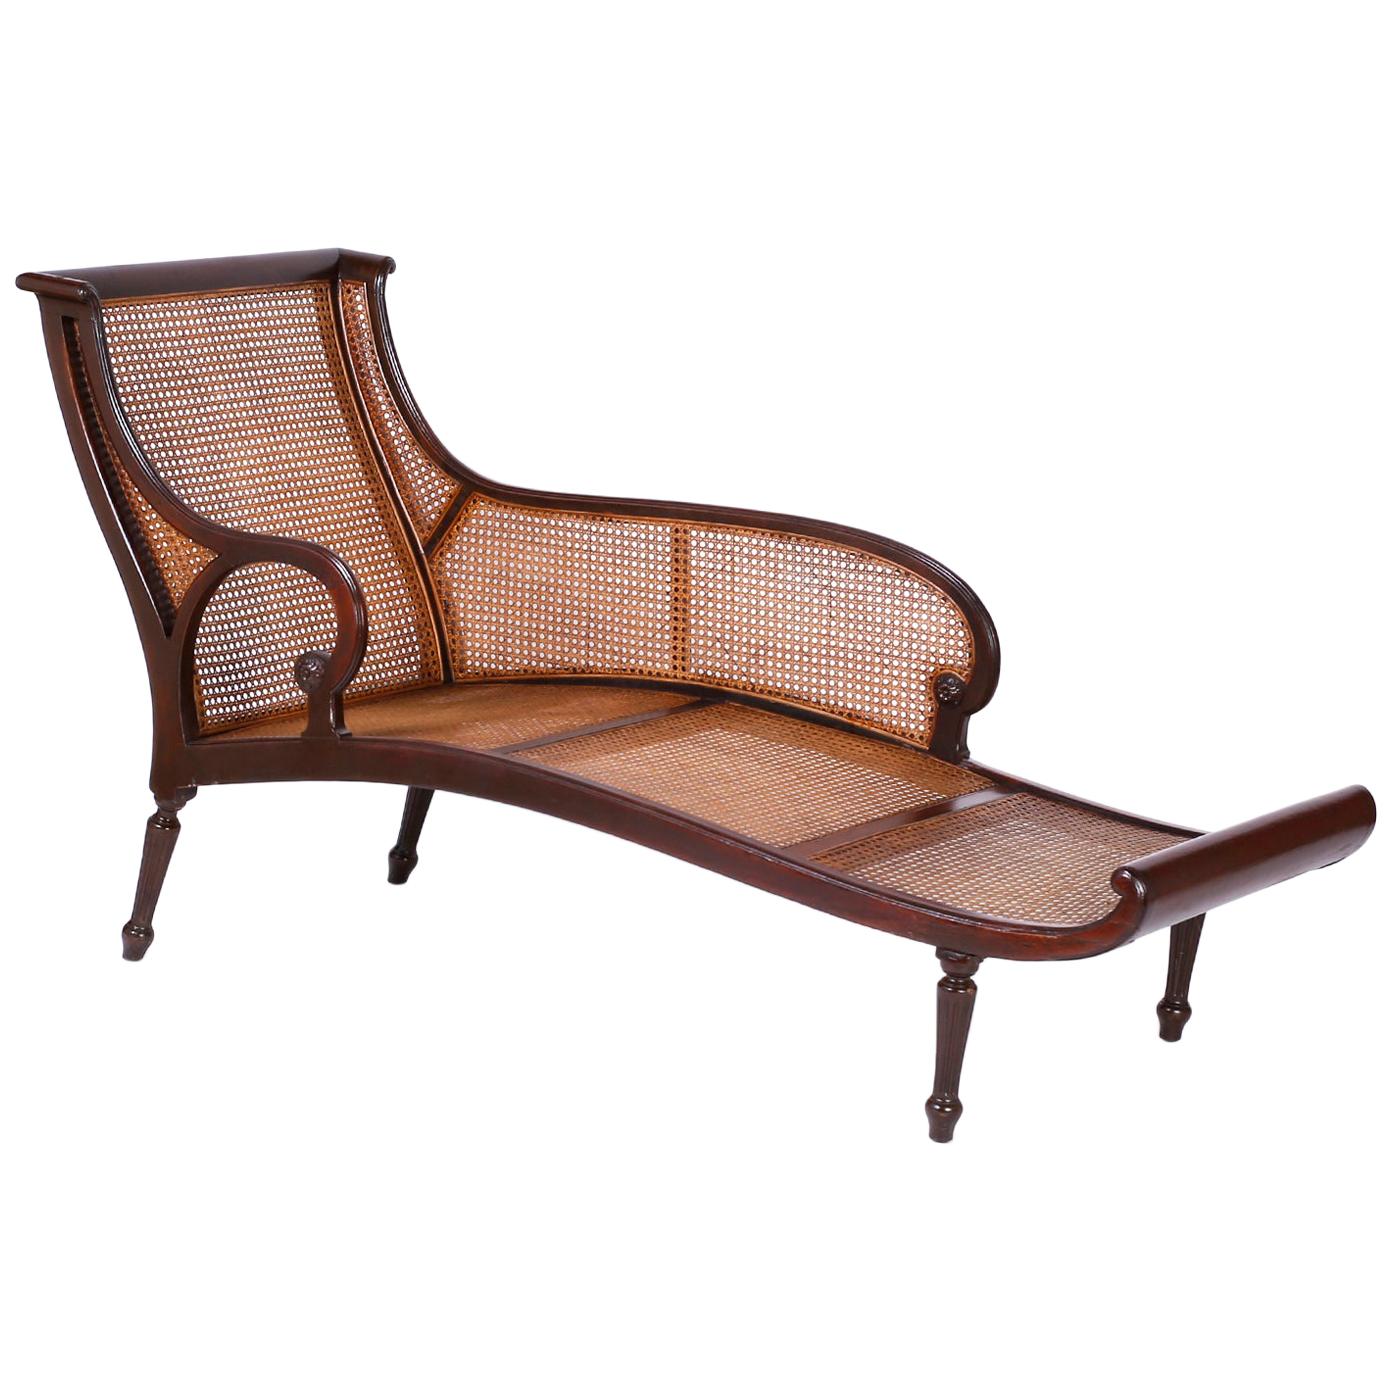 British Colonial Caned Chaise Lounge or Recamier